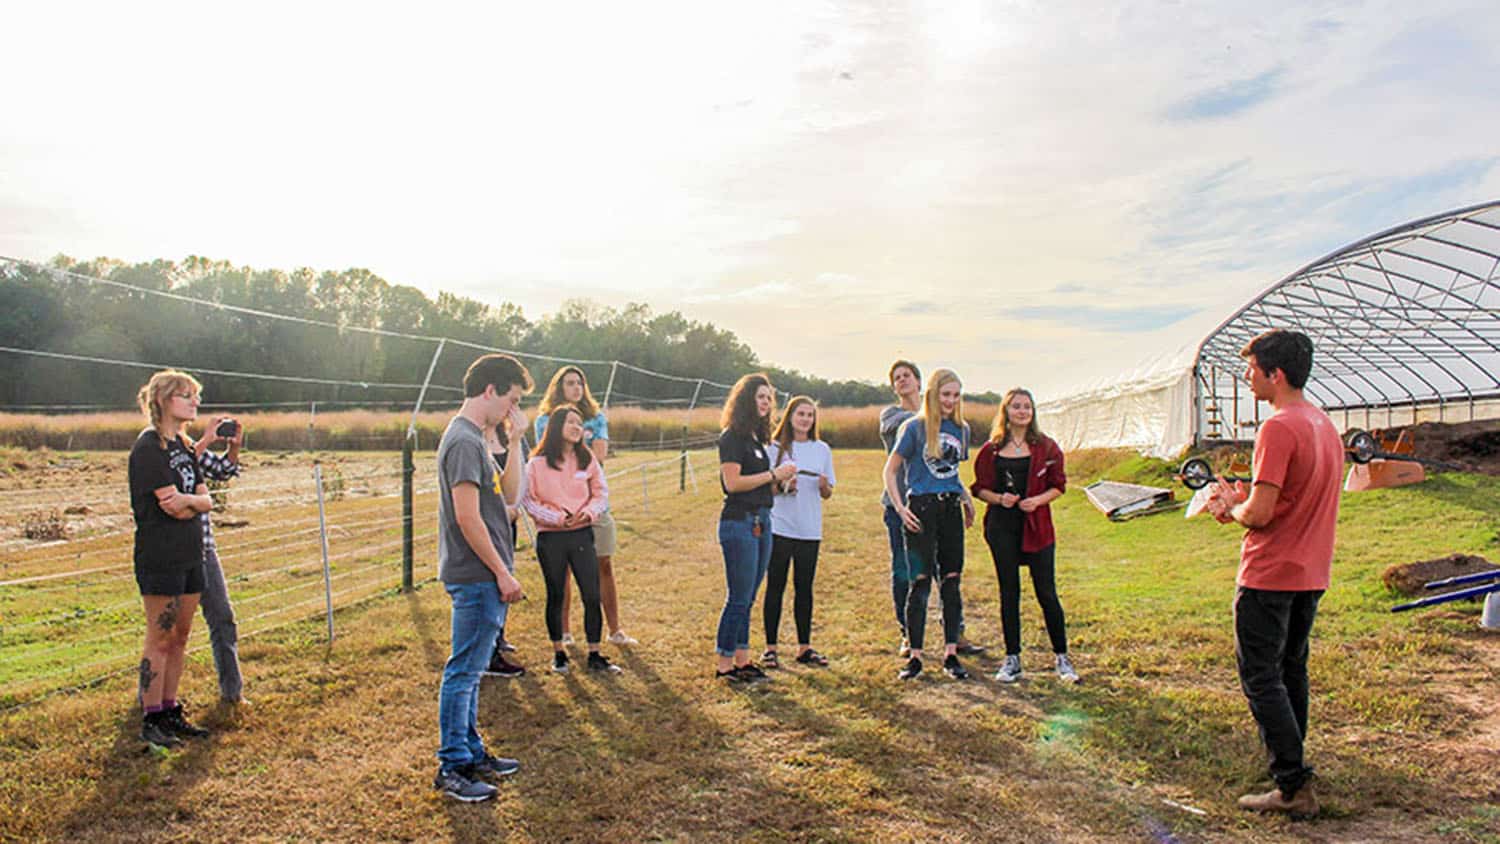 A group of Sustainability Stewards, student leaders that spearhead sustainable initiatives at NC State, discuss a project while outdoors.